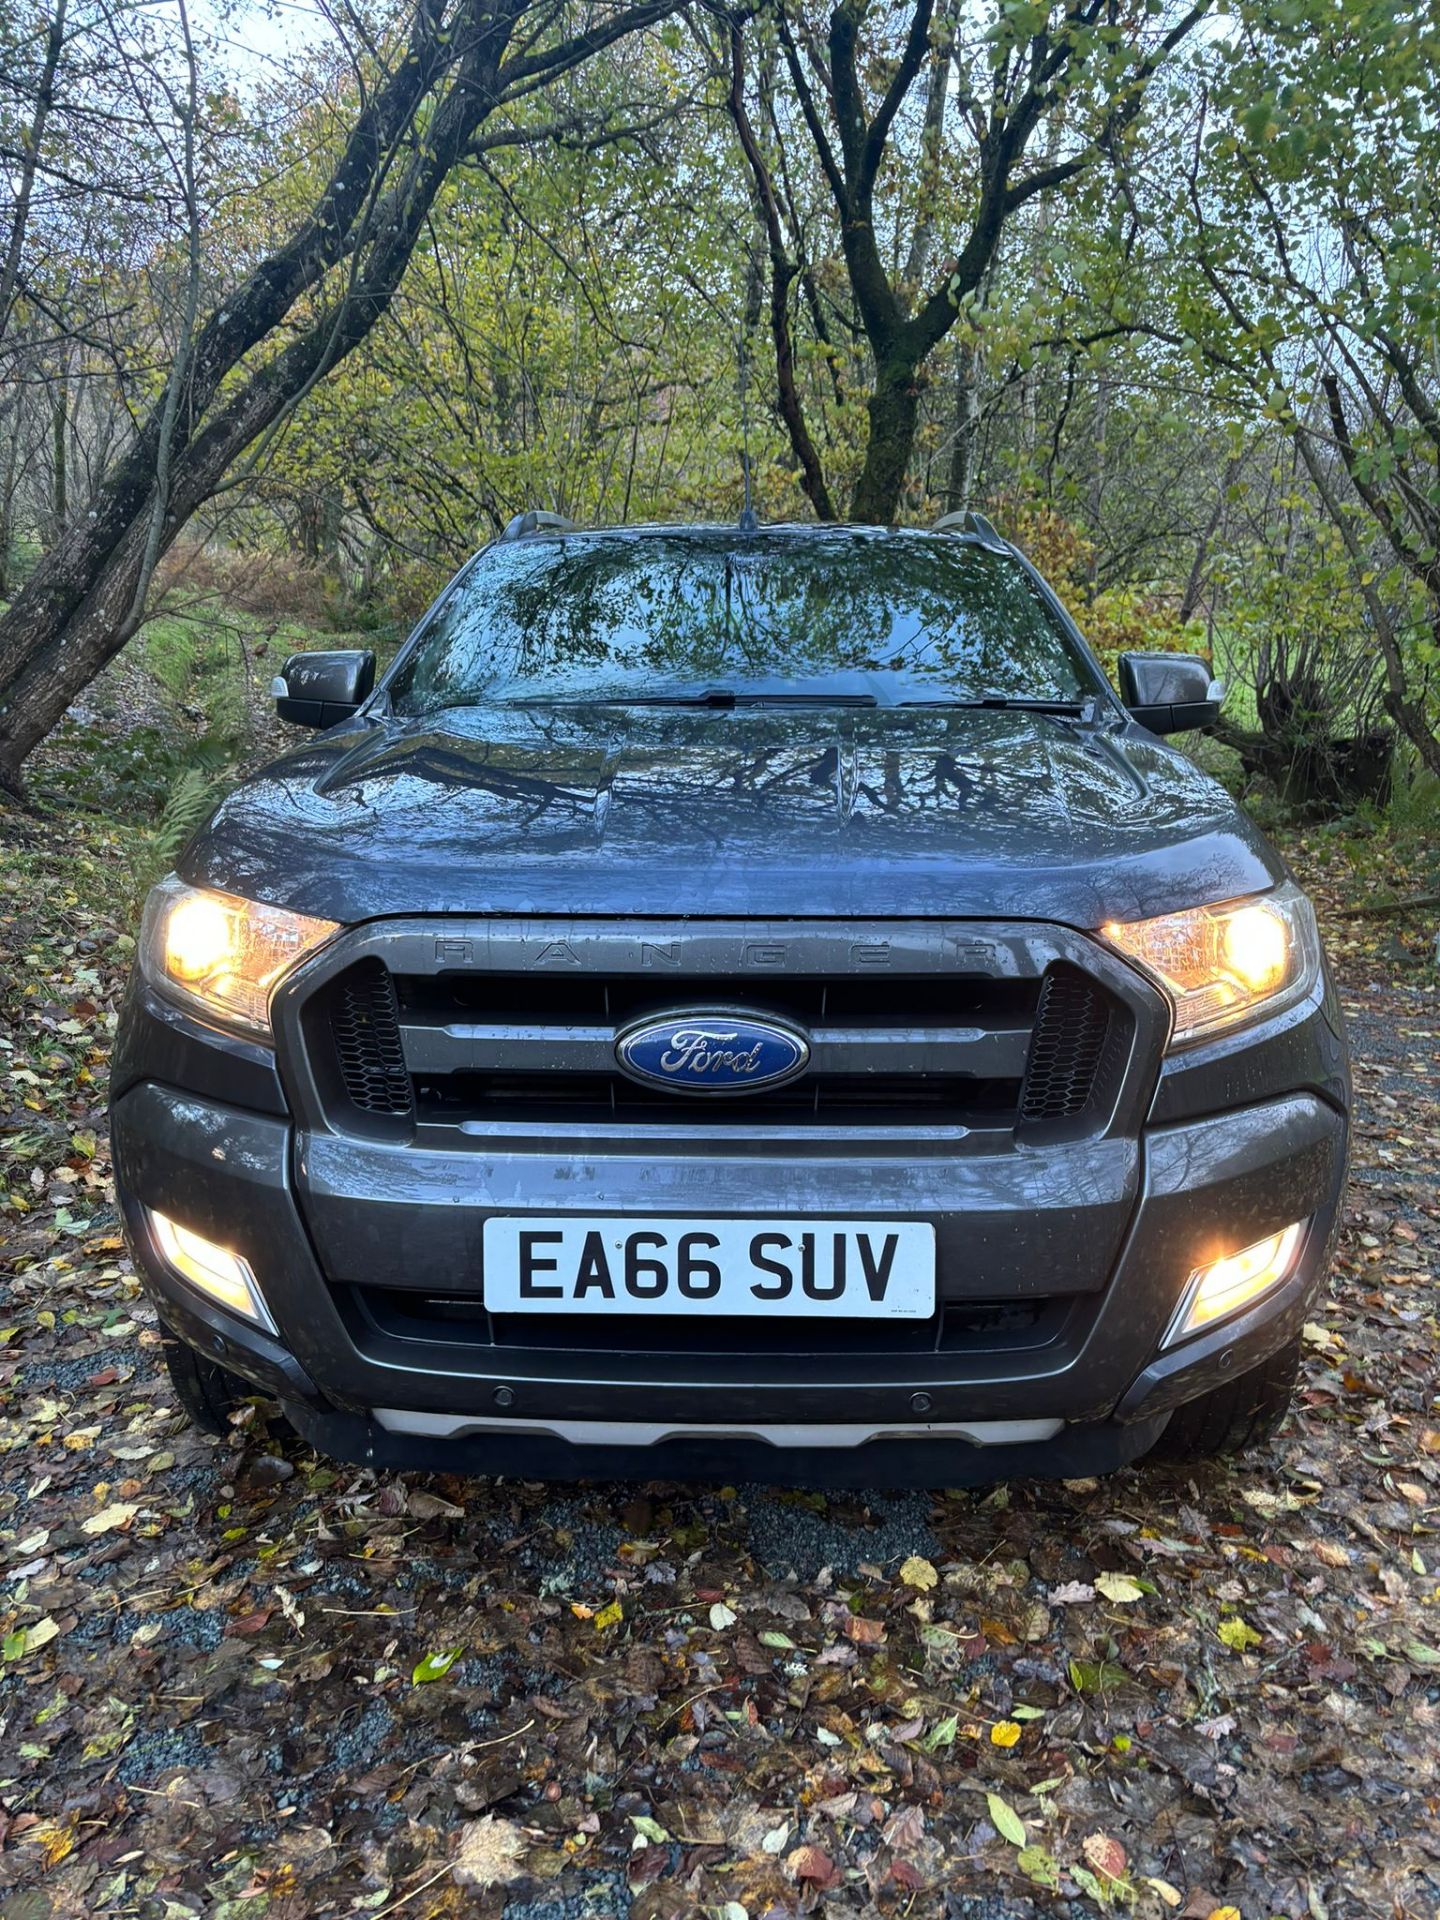 FORD RANGER WILDTRAK 3.2 AUTOMATIC PICKUP TRUCK DOUBLE CAB - Image 4 of 12